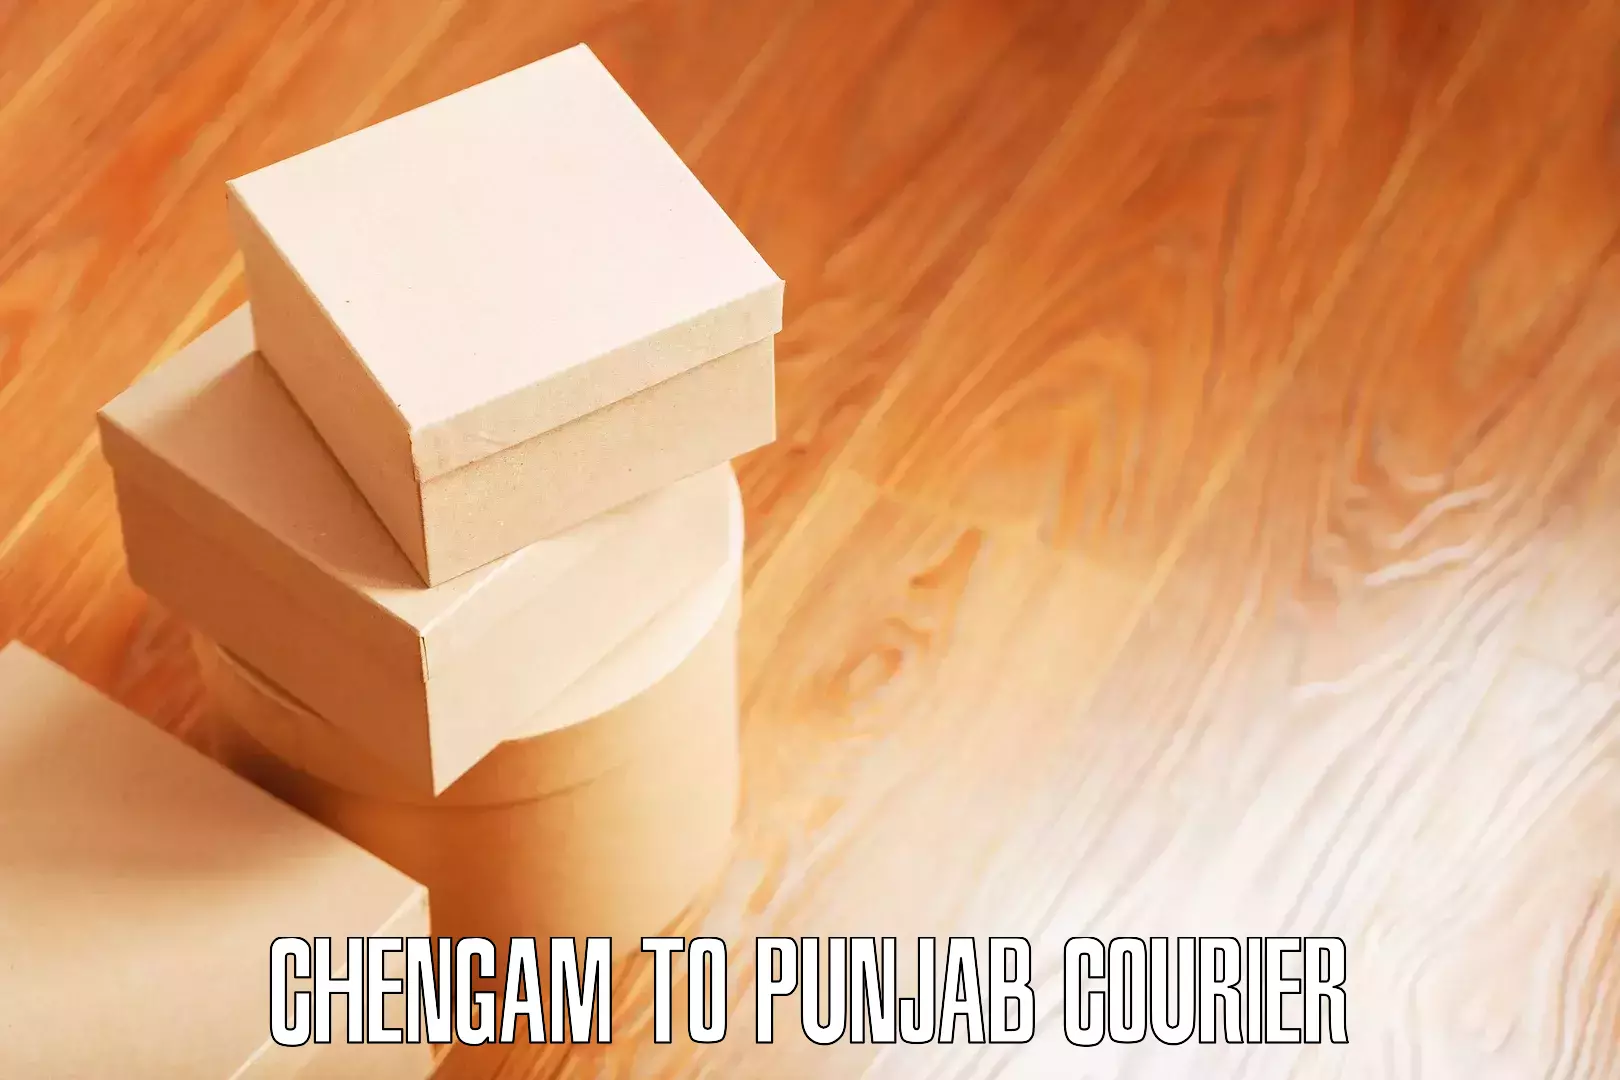 Professional home movers Chengam to Punjab Agricultural University Ludhiana